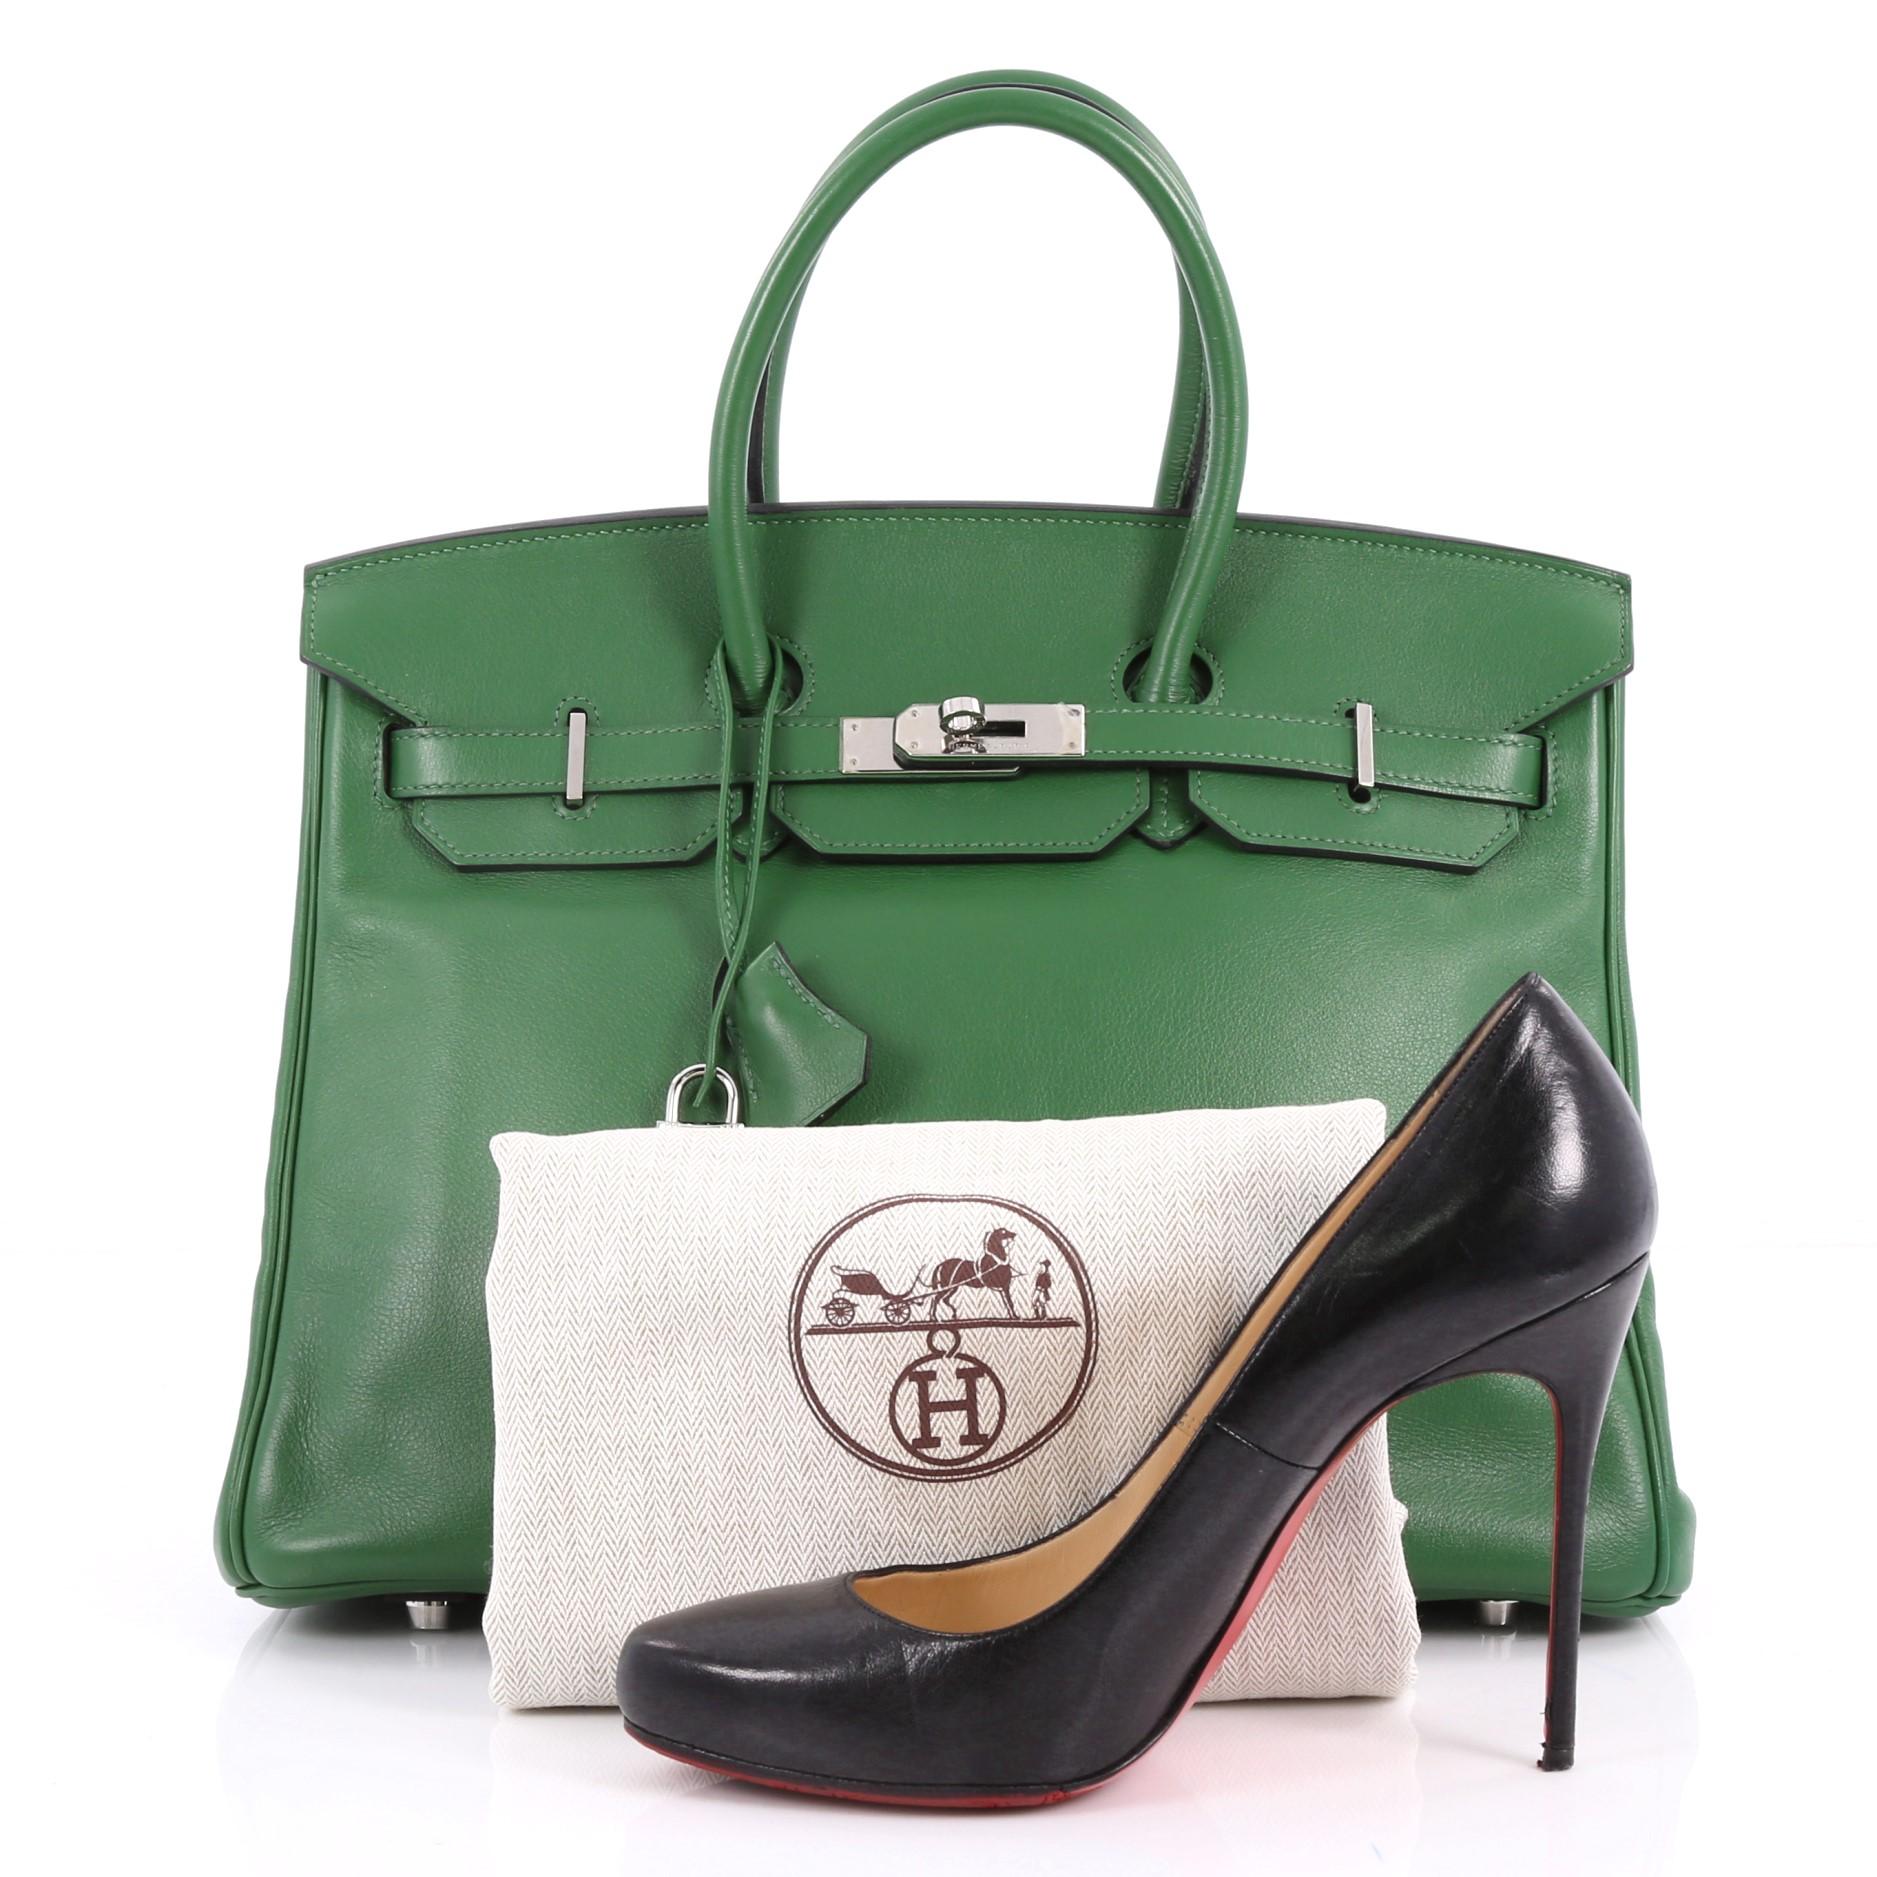 This authentic Hermes Birkin Handbag Vert Bengal Swift with Palladium Hardware 35 stands as one of the most-coveted and timeless bags fit for any fashionista. Constructed from scratch-resistant Vert Bengal swift leather, this bag features